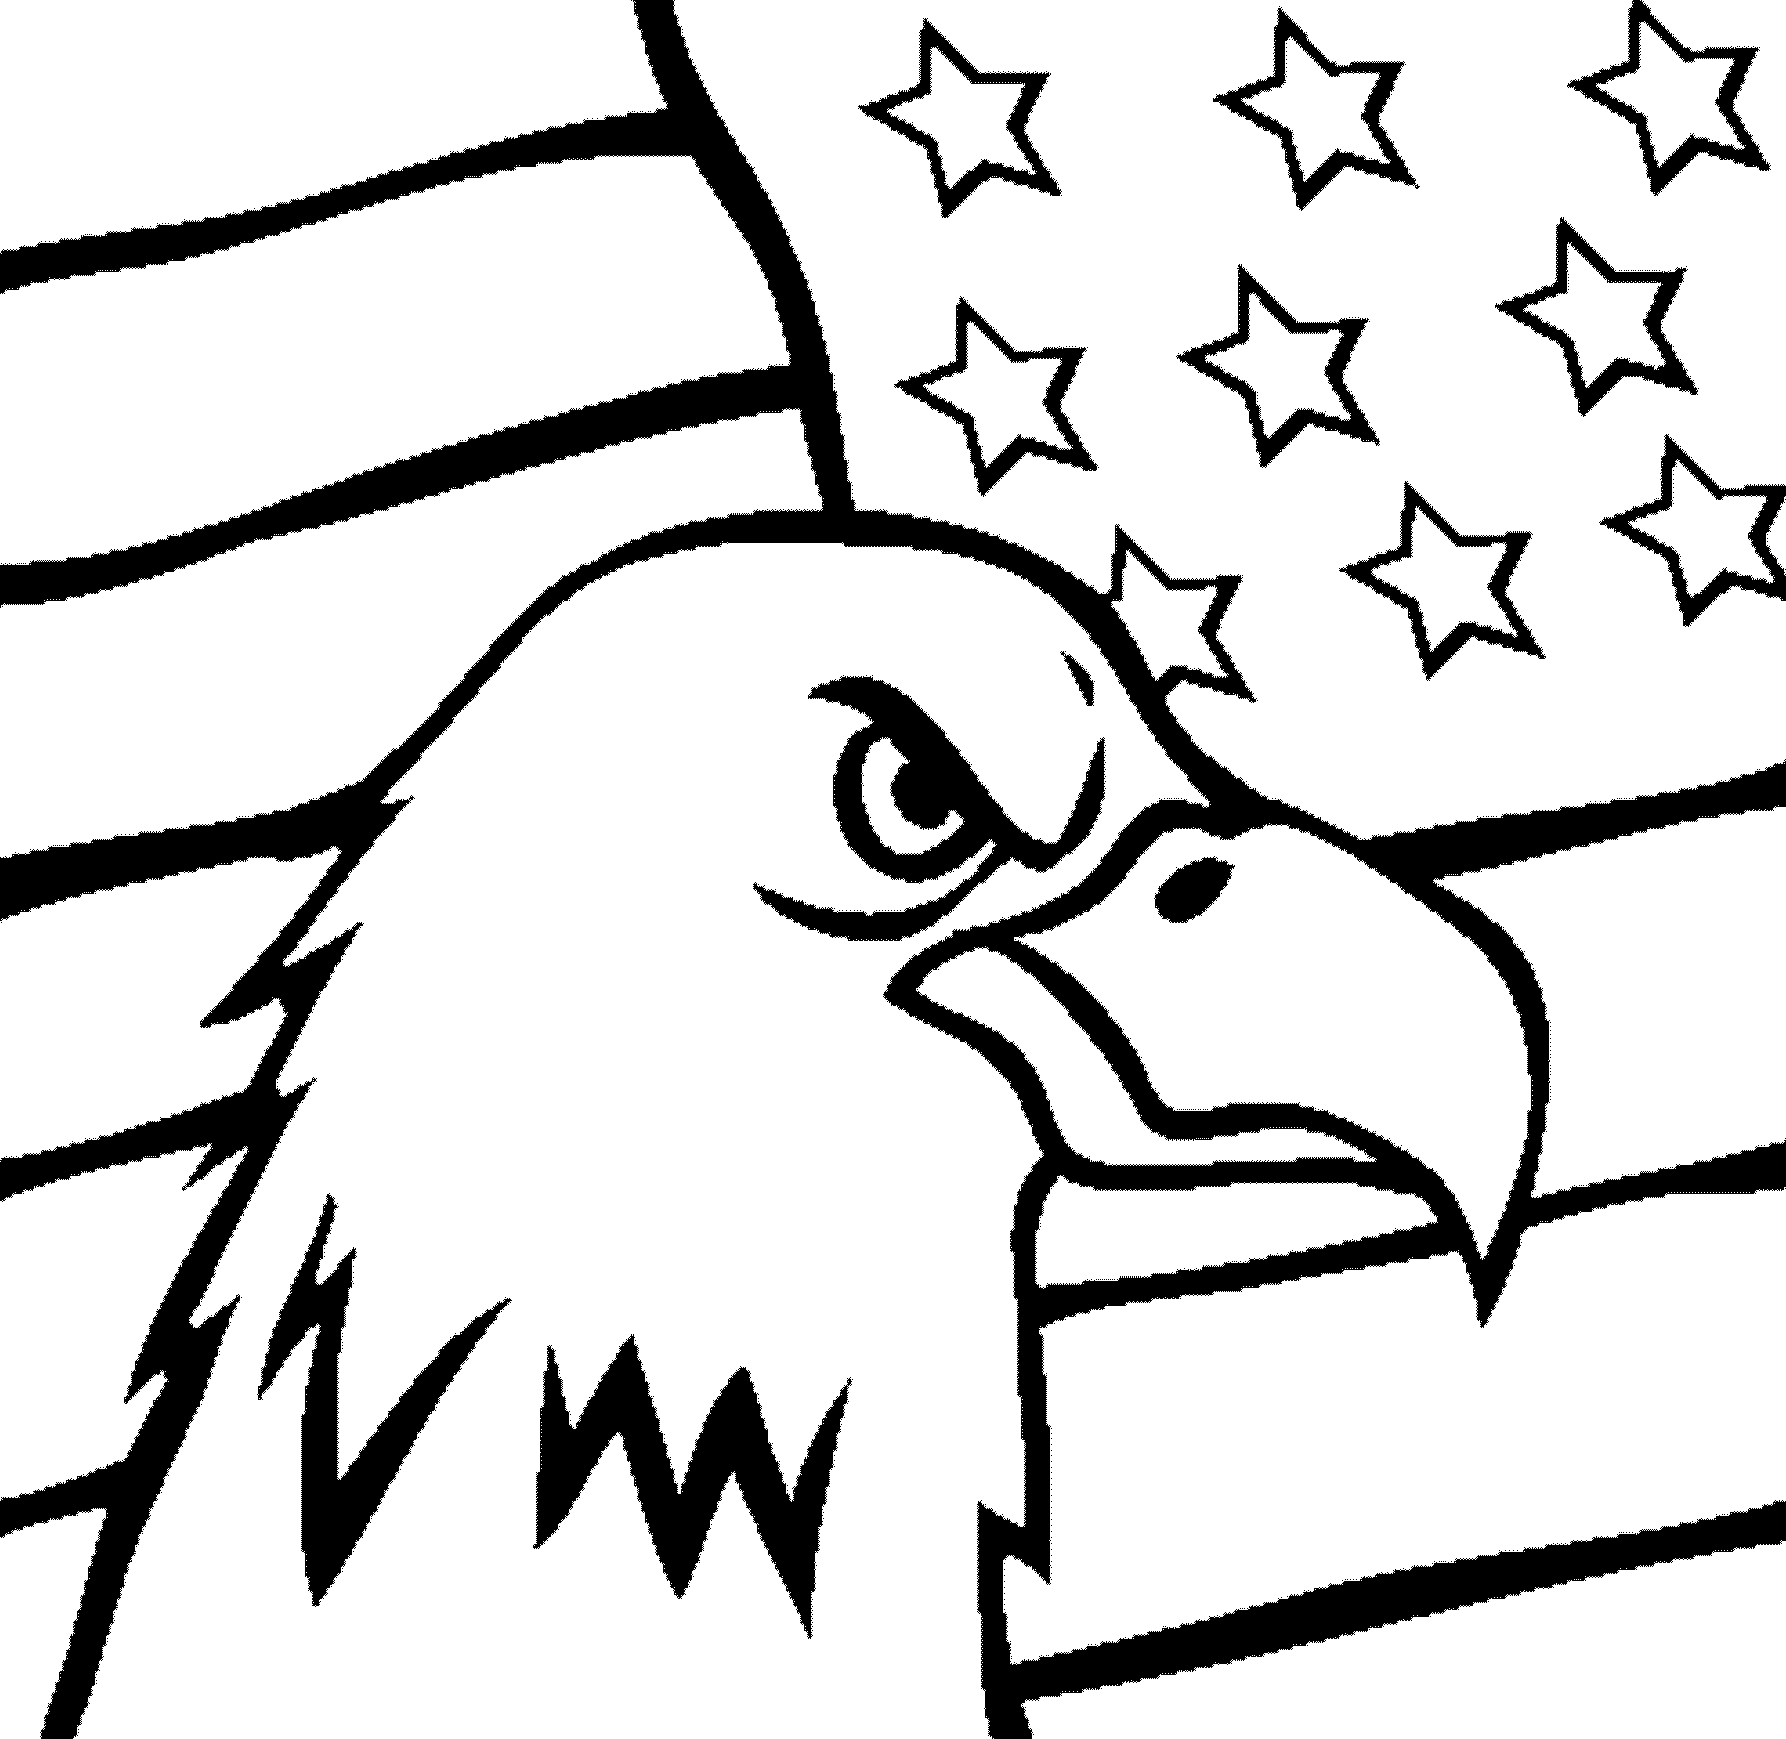 american flag coloring pages for toddlers - Printable Kids ...